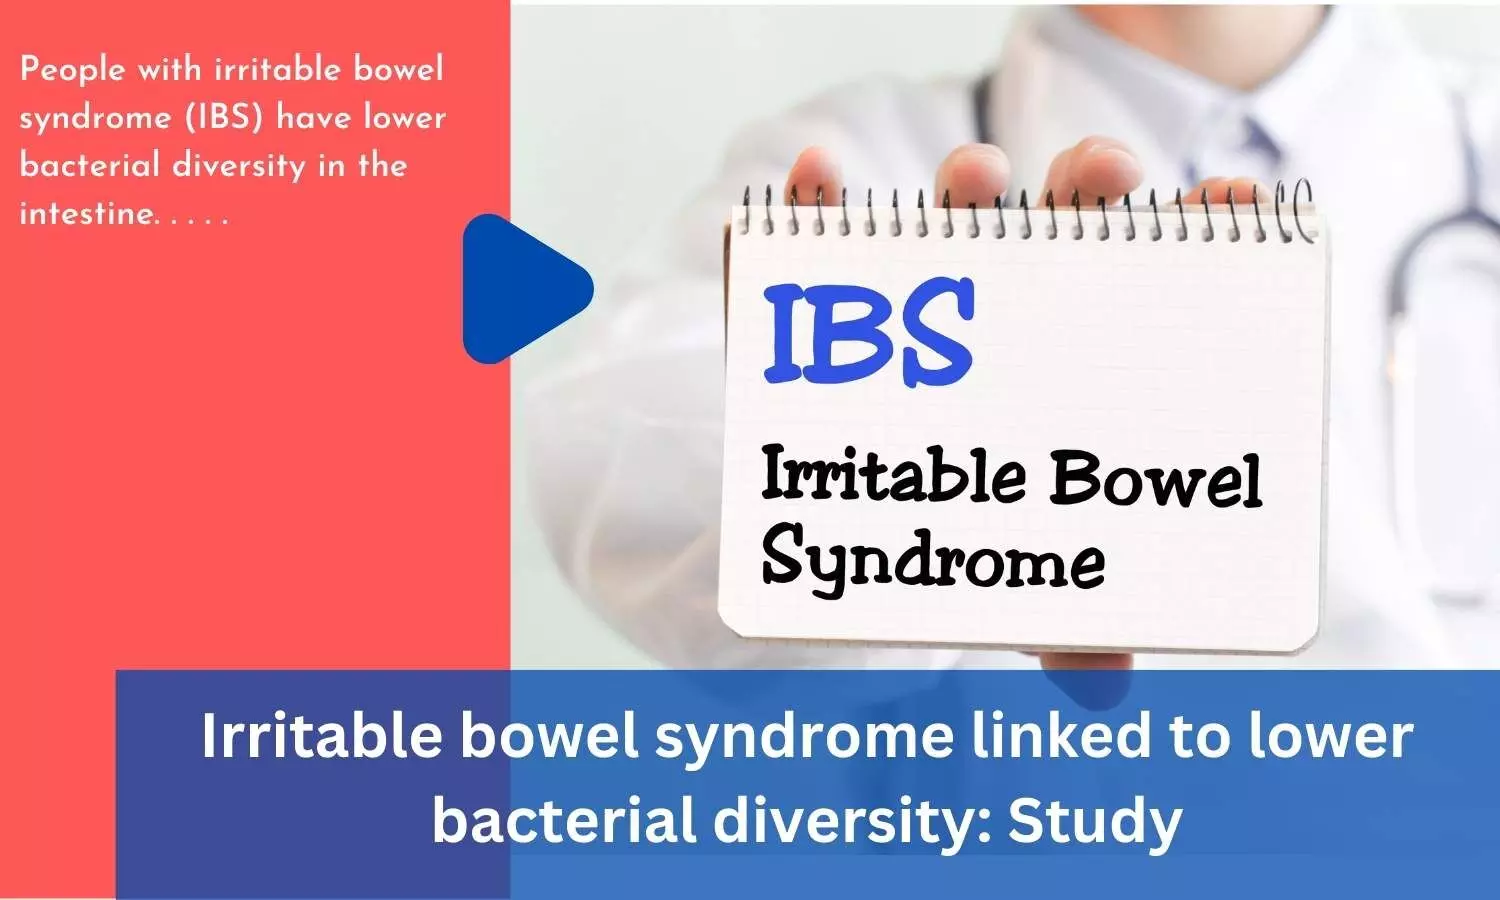 Irritable bowel syndrome linked to lower bacterial diversity: Study